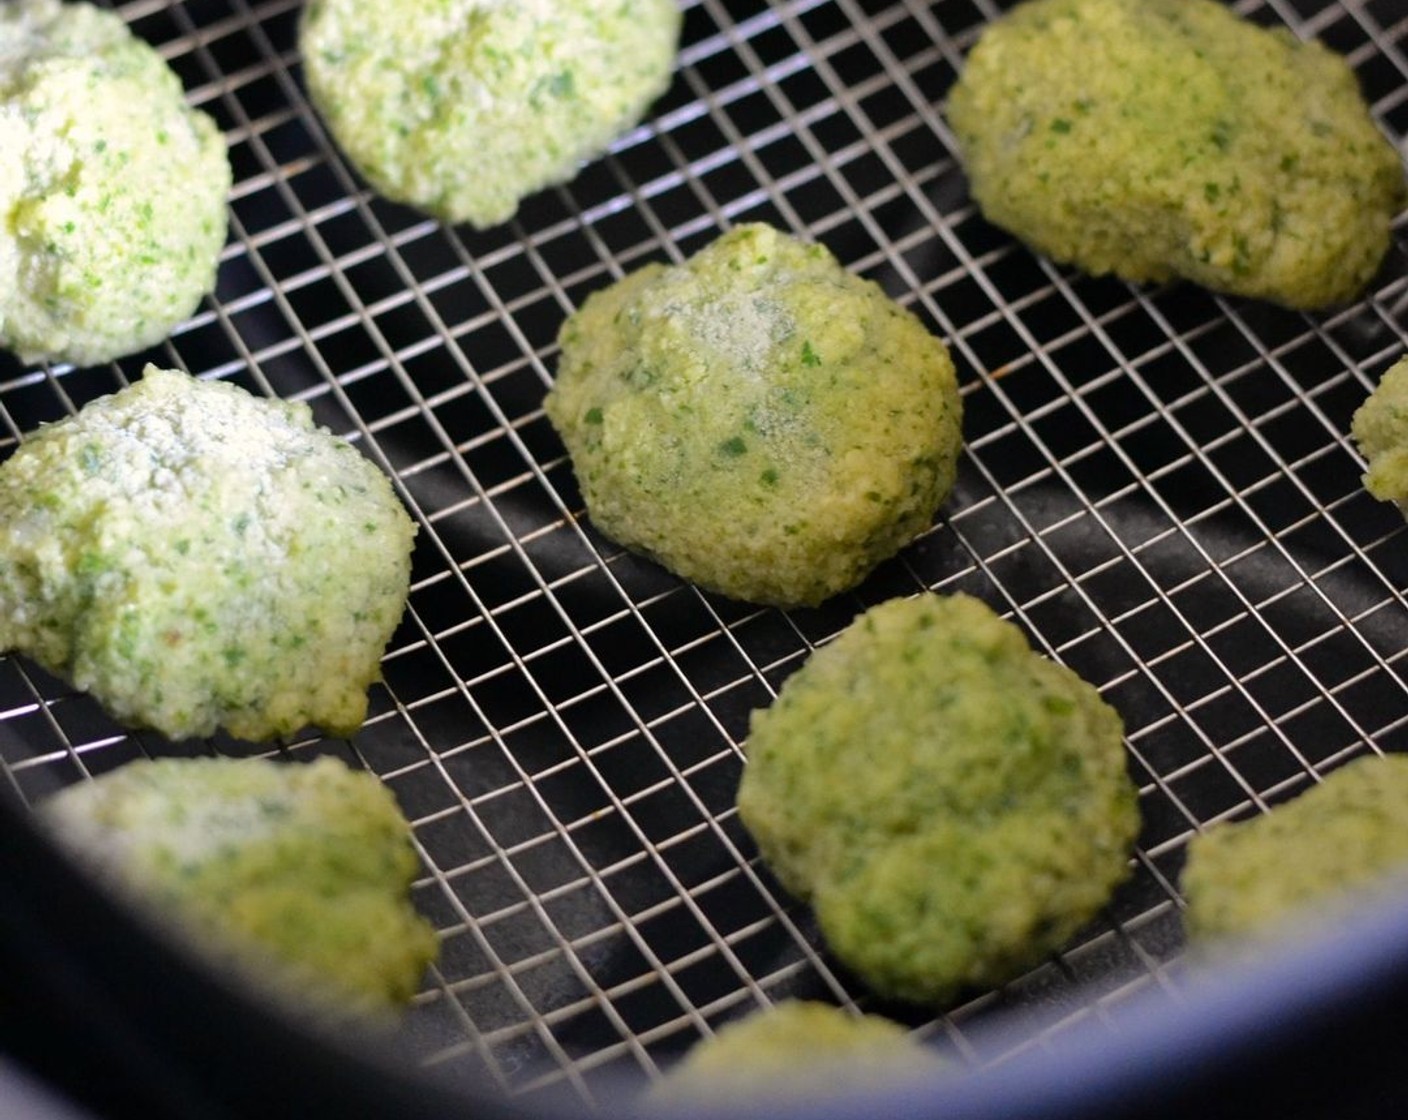 step 4 Spray or brush the basket with Oil (as needed). Put frozen falafel balls in a single layer at the bottom of the basket and wait a couple of minutes until their tops start to get a bit shiny. Then bake them for 10 minutes at 330 degrees F (165 degrees C).